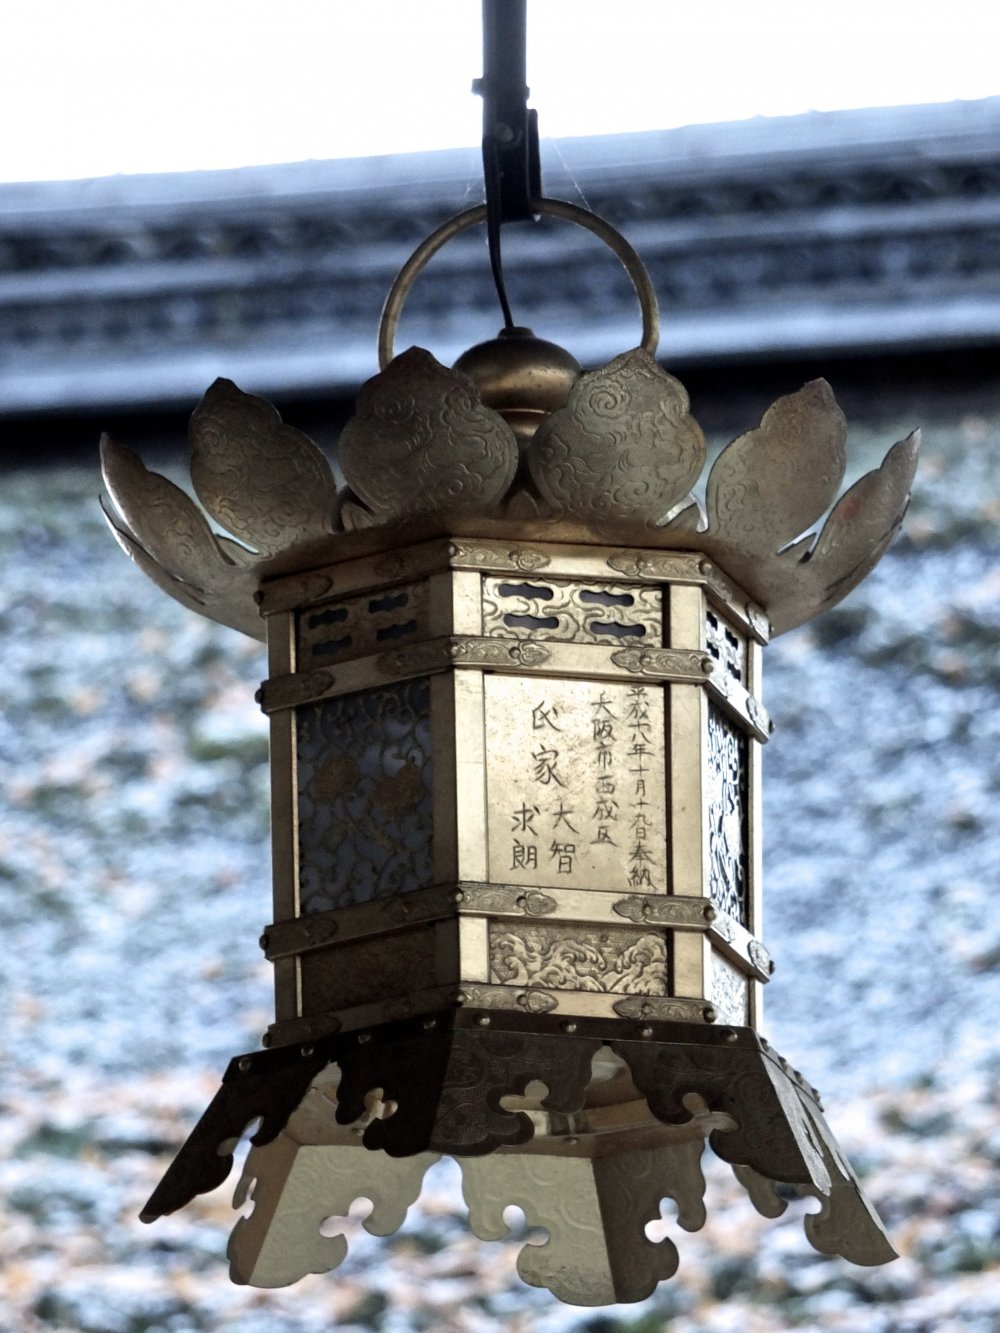 A lantern in front of a roof covered in frost was extremely beautiful